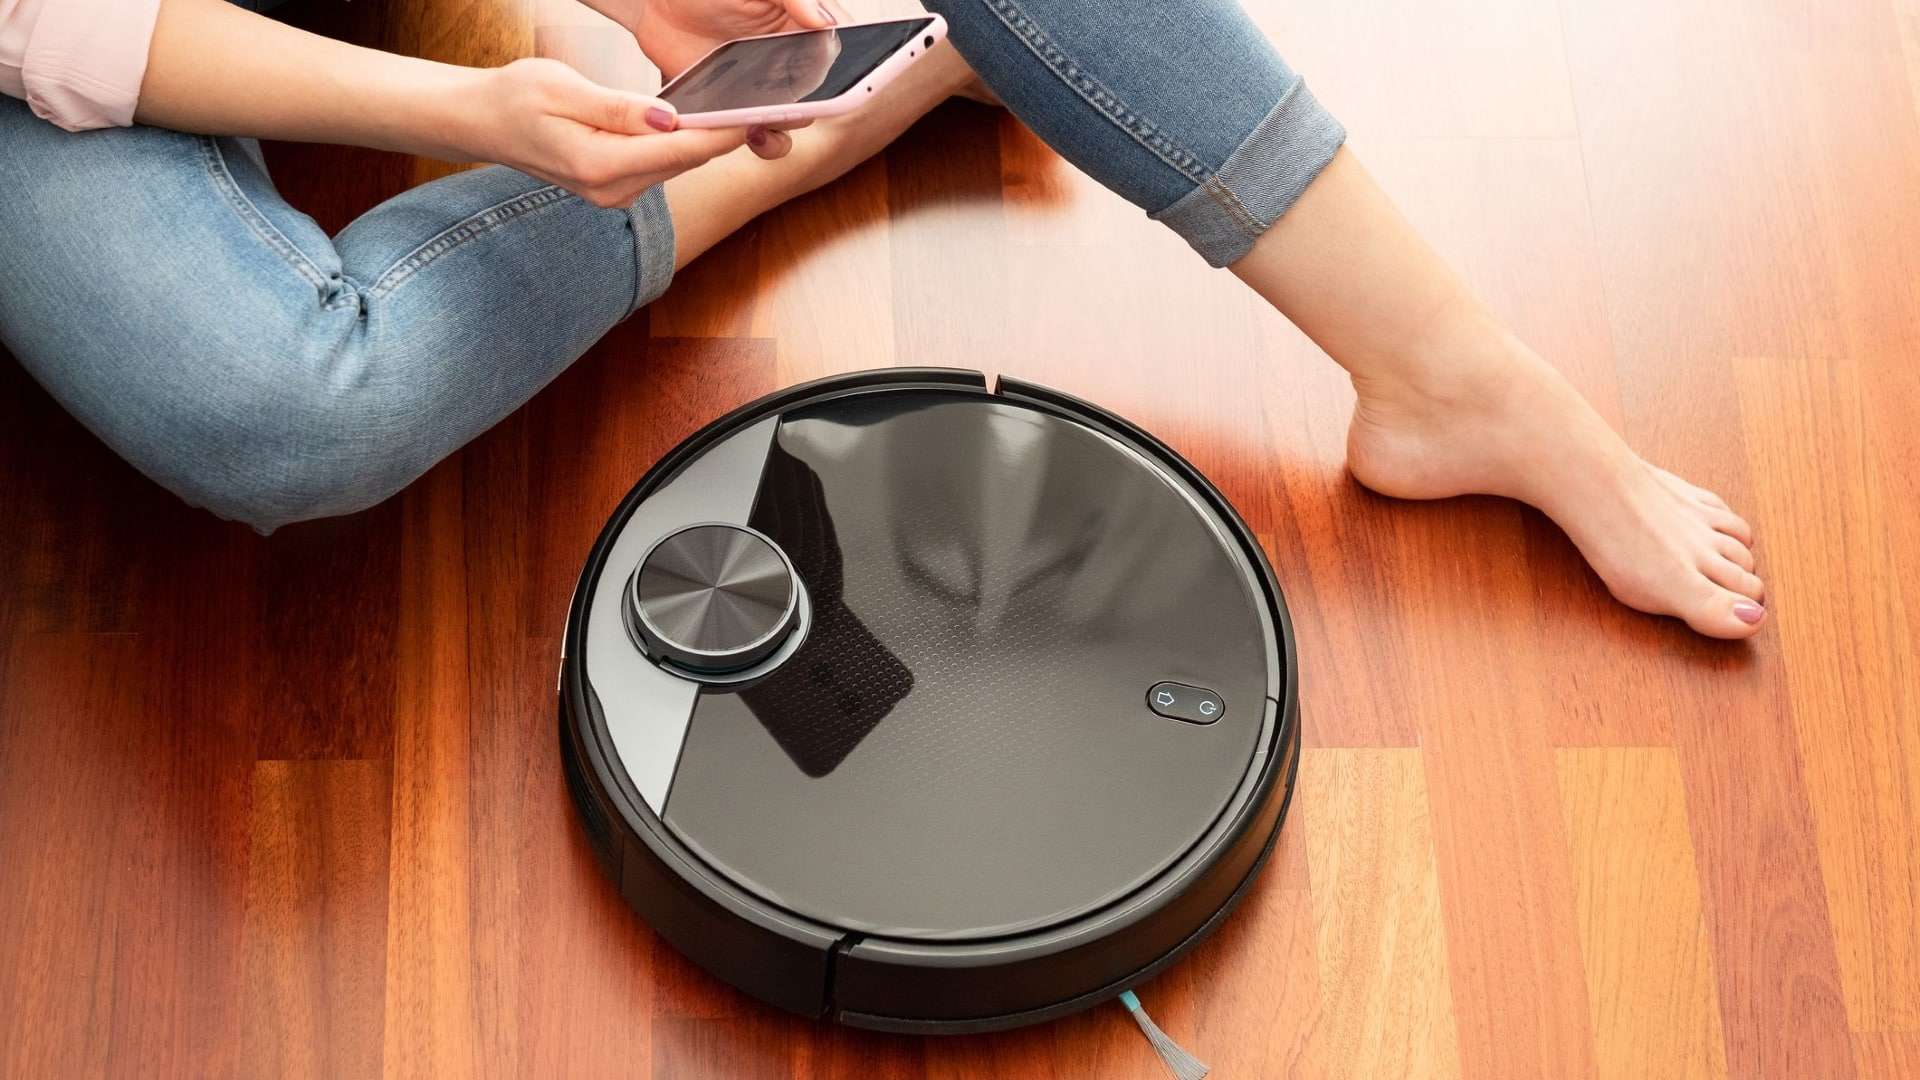 a robotic vacuum cleaner that records an intimate picture of a woman;  The photo was posted to Facebook